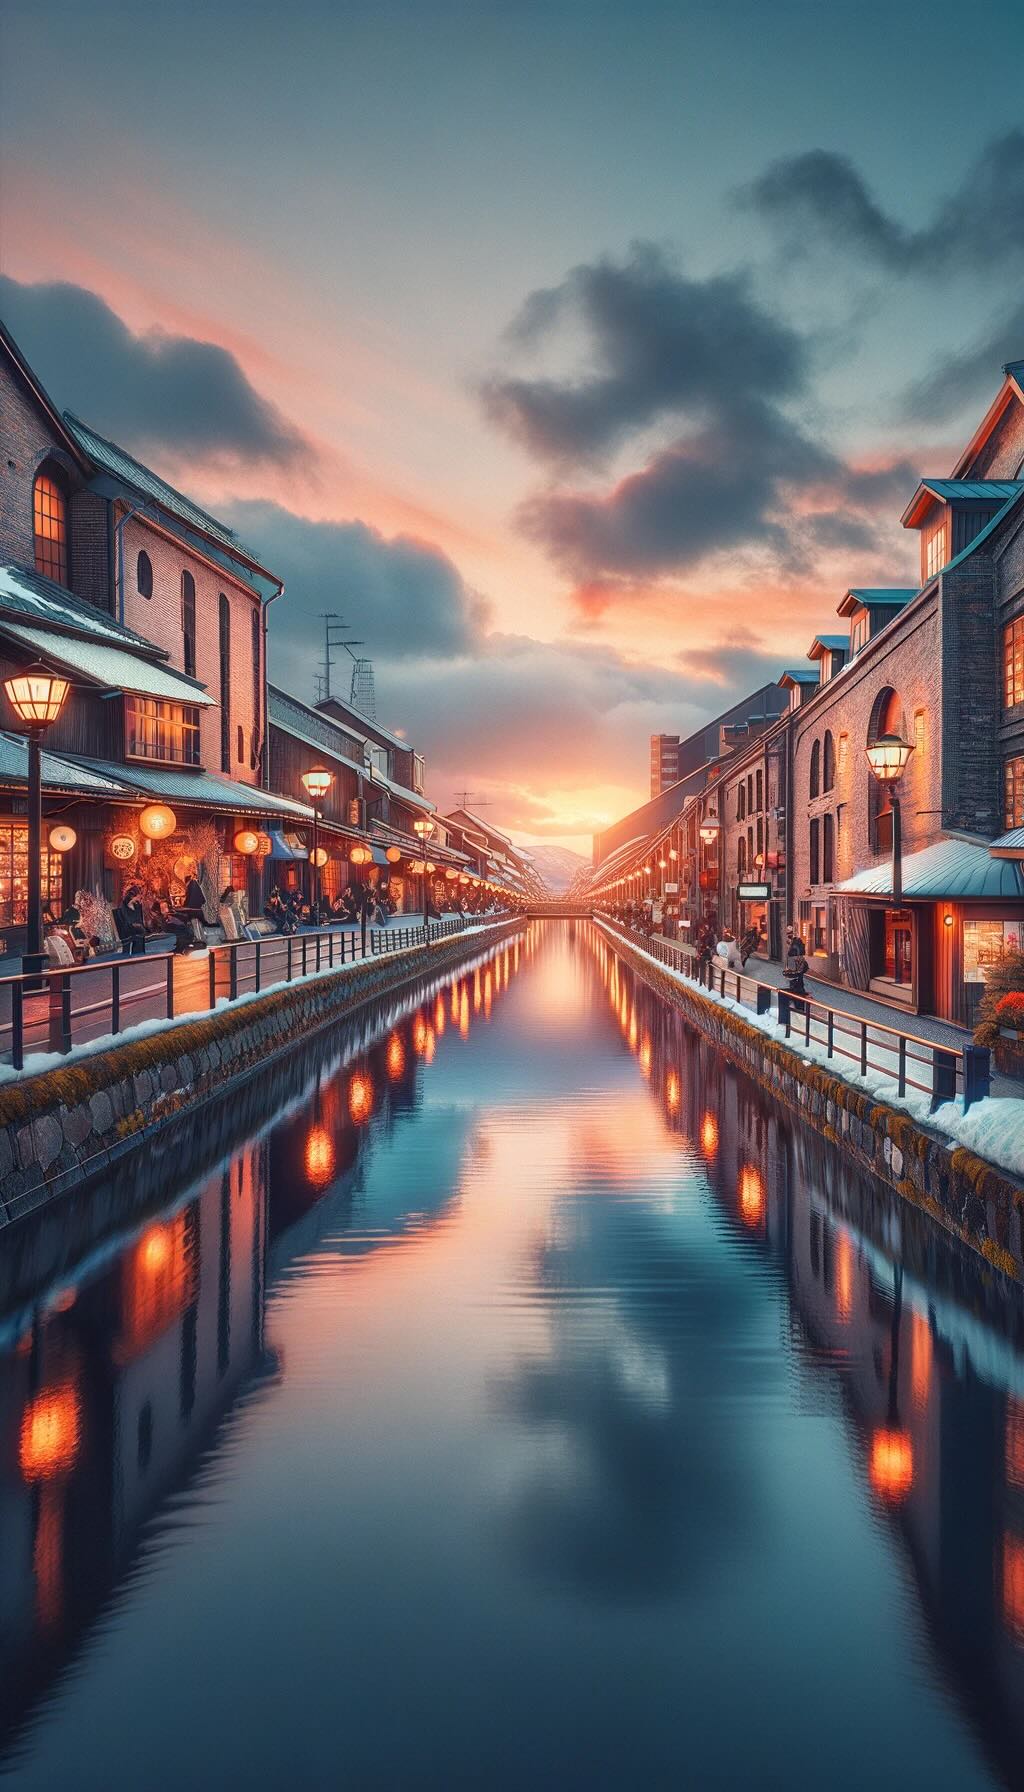 Otaru Canal in Hokkaido, Japan, capturing the canal's rich history, romantic allure, and the picturesque tableau during sunset with vintage warehouses along the waterway, the romantic gas lamps, and people enjoying the serene atmosphere, conveying nostalgia, romance, and relaxation